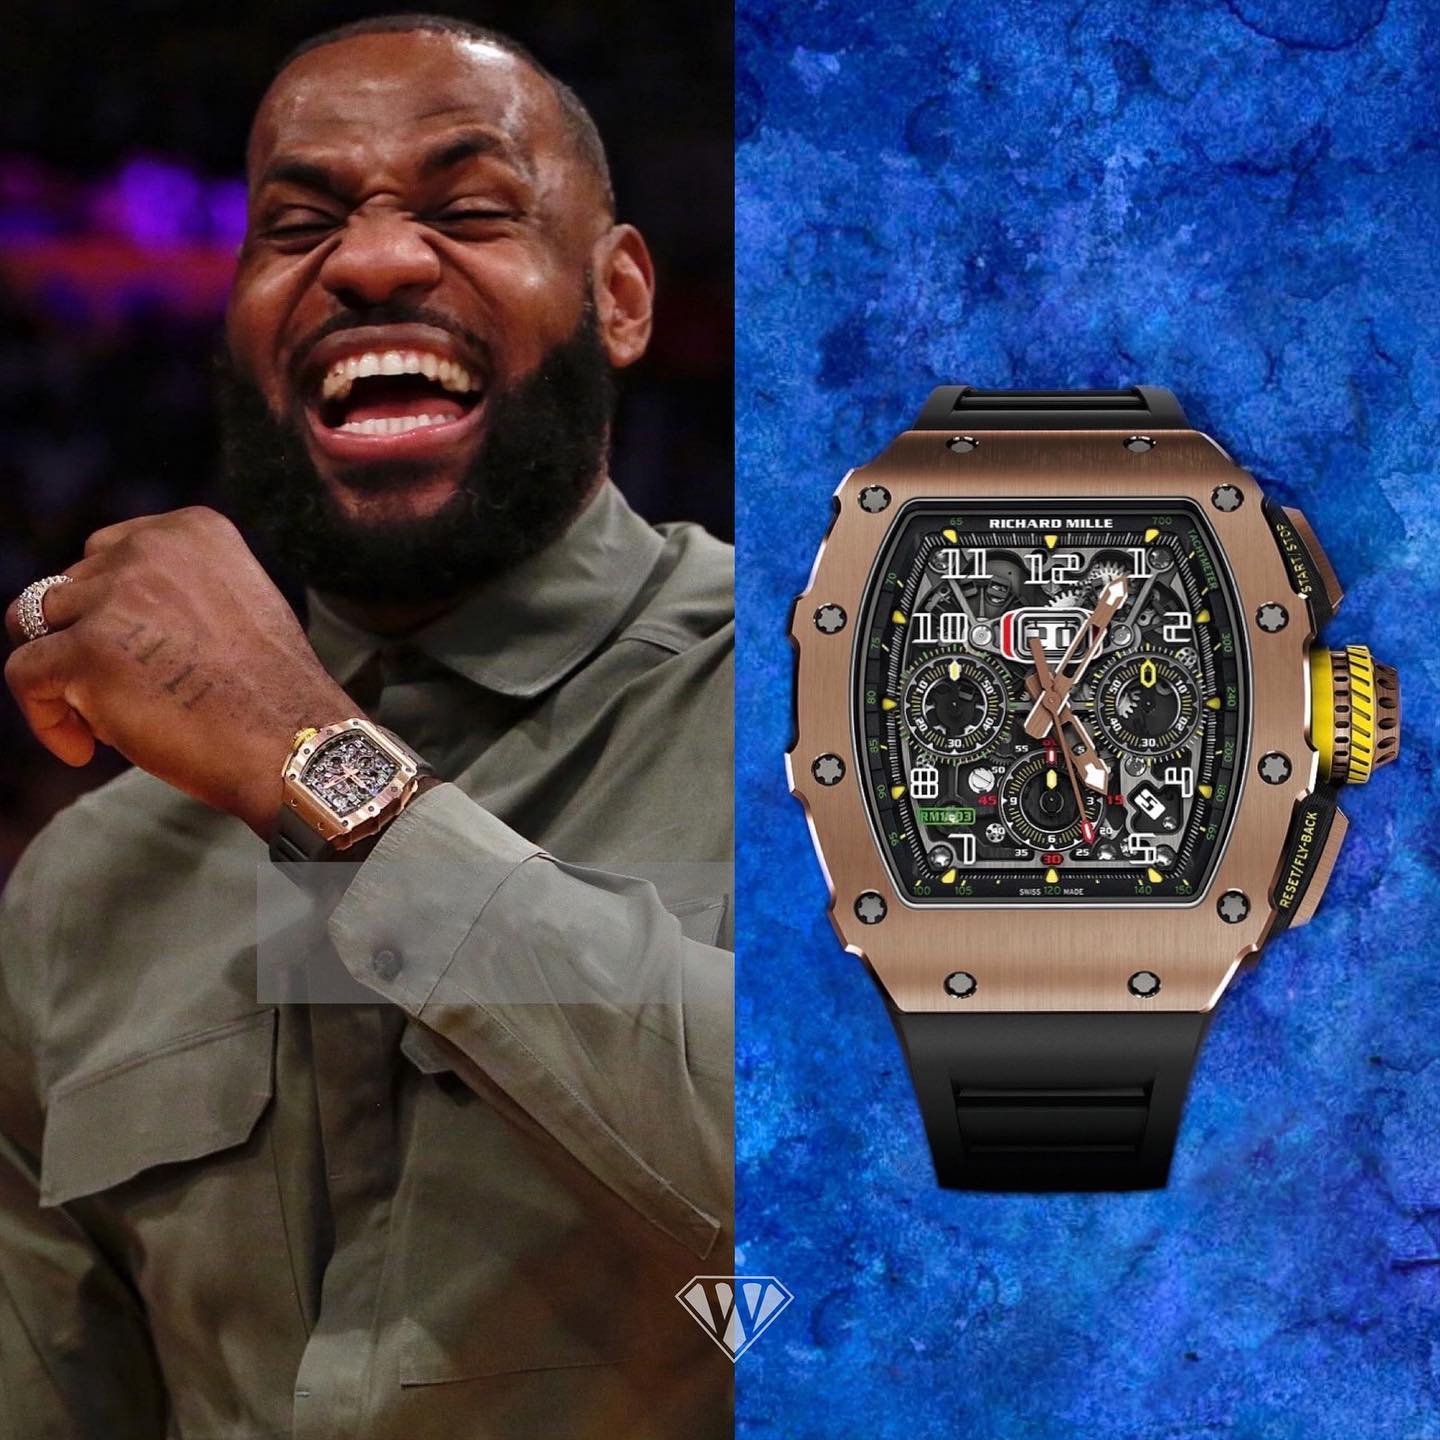 Inside LeBron James' insane watch collection